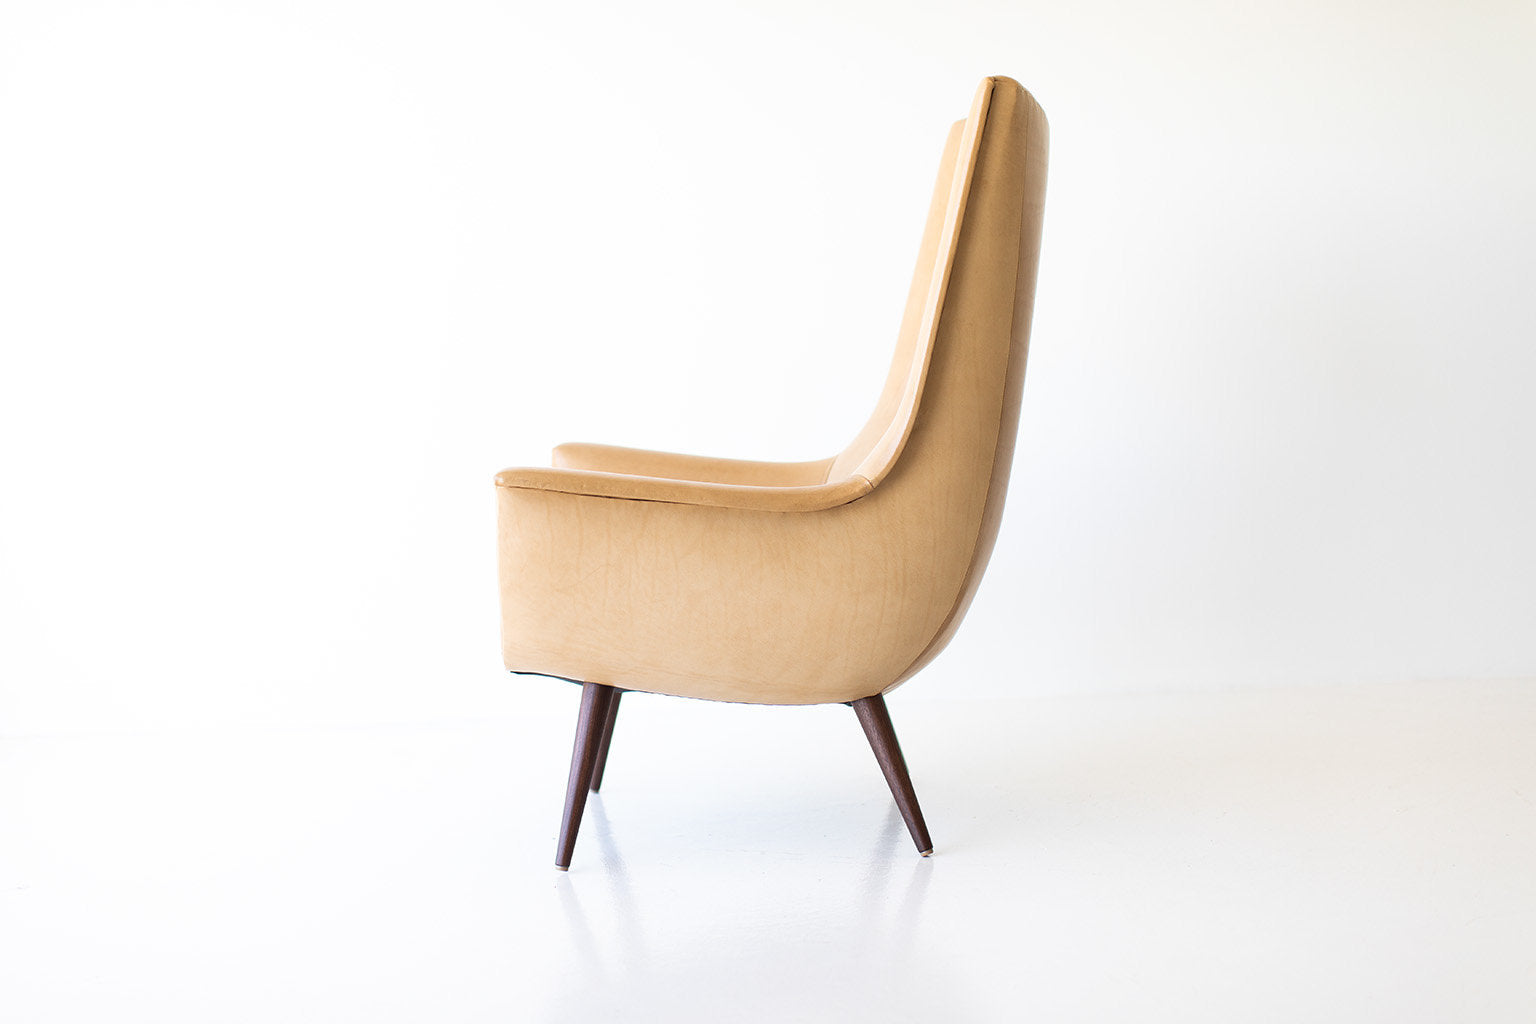 lawrence-peabody-chair-03